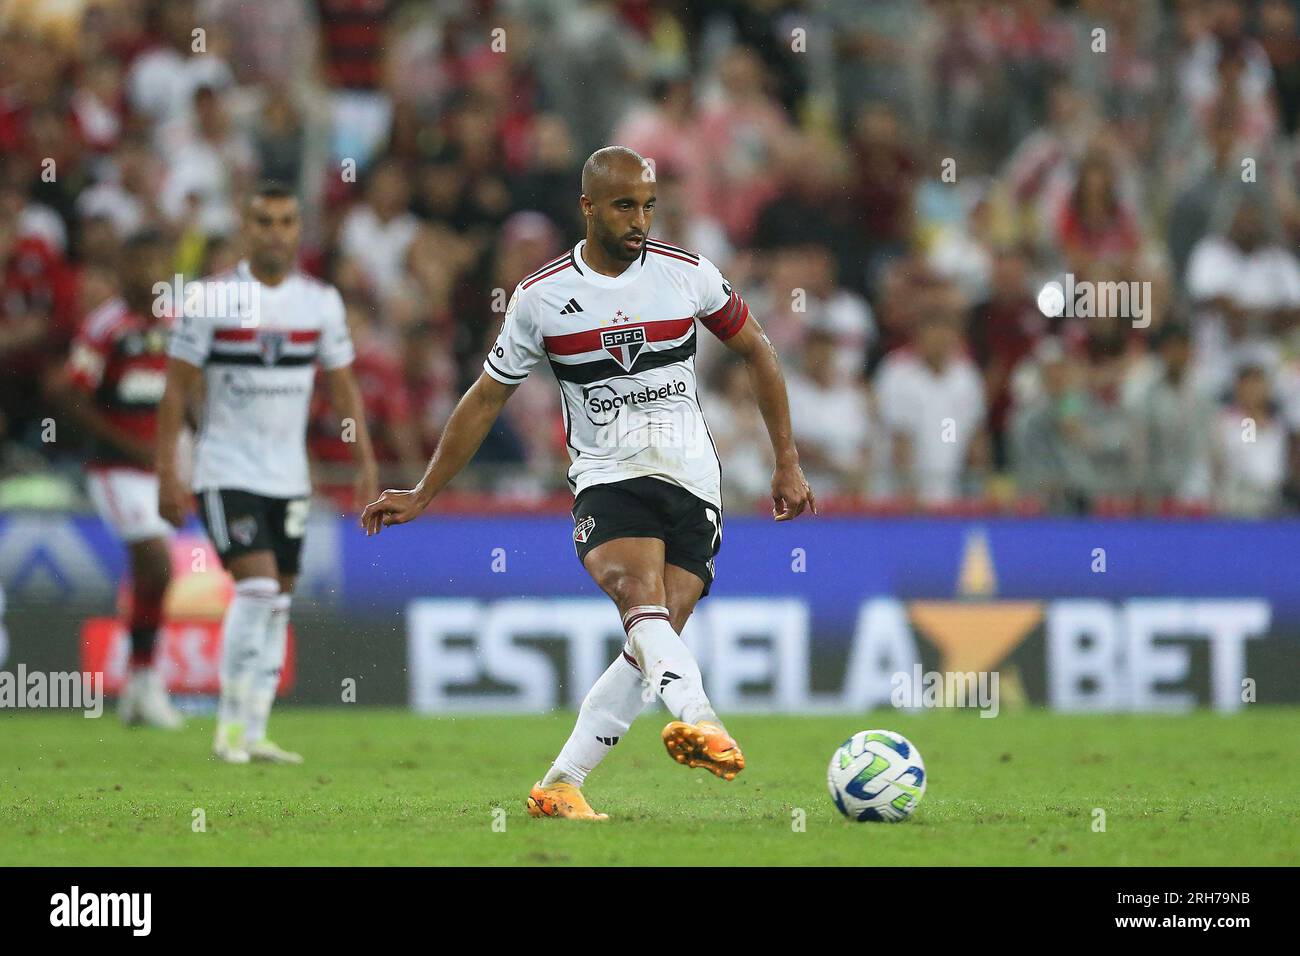 Lucas Moura of Sao Paulo heads the ball during Campeonato